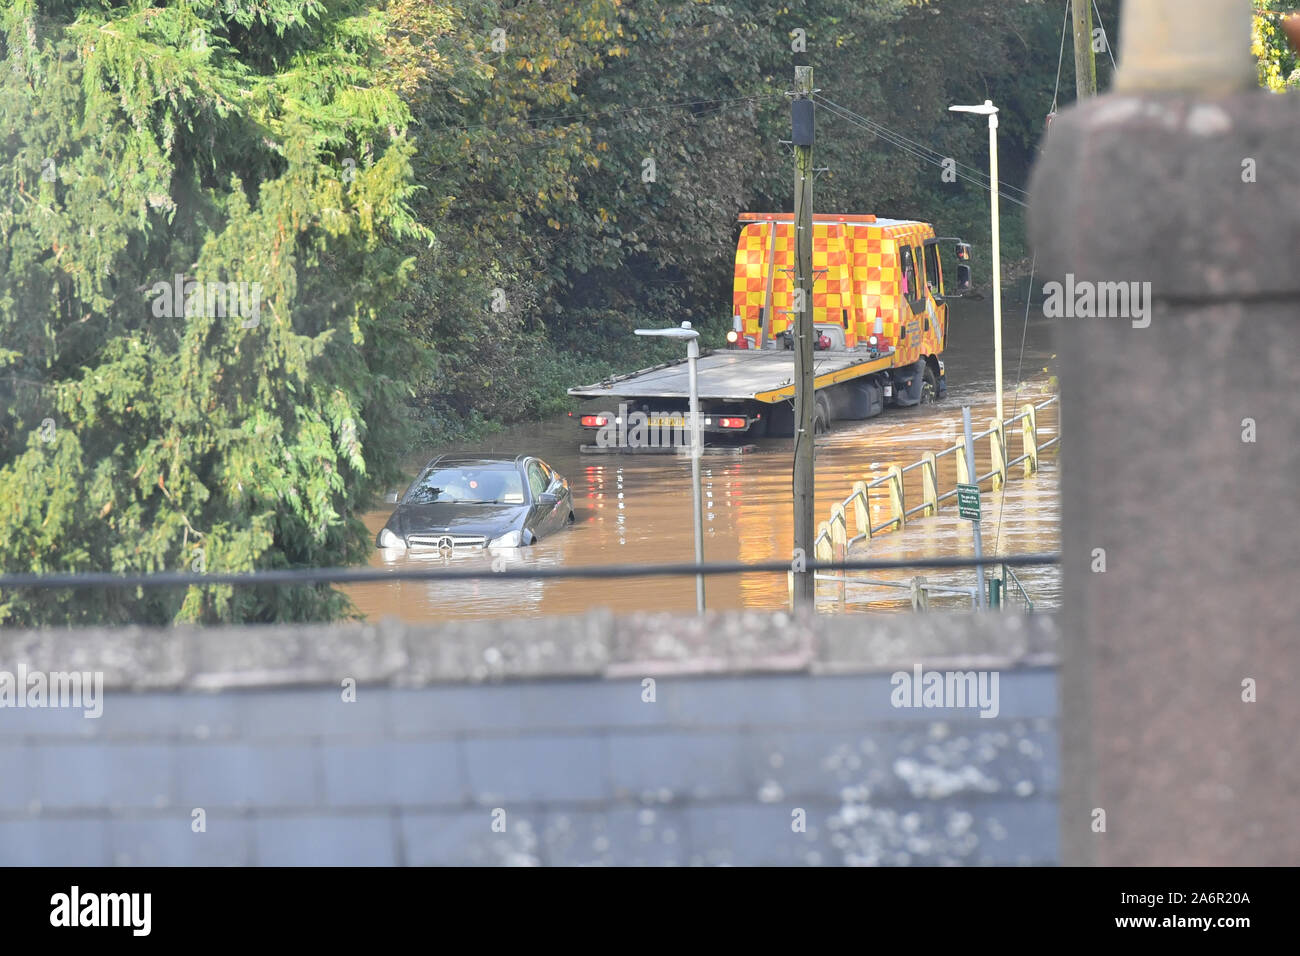 A recovery truck is driven into flood water from the River Wye in Lower Lydbrook, Gloucestershire, as its driver attempts to recover a vehicle left stranded in the water. Stock Photo